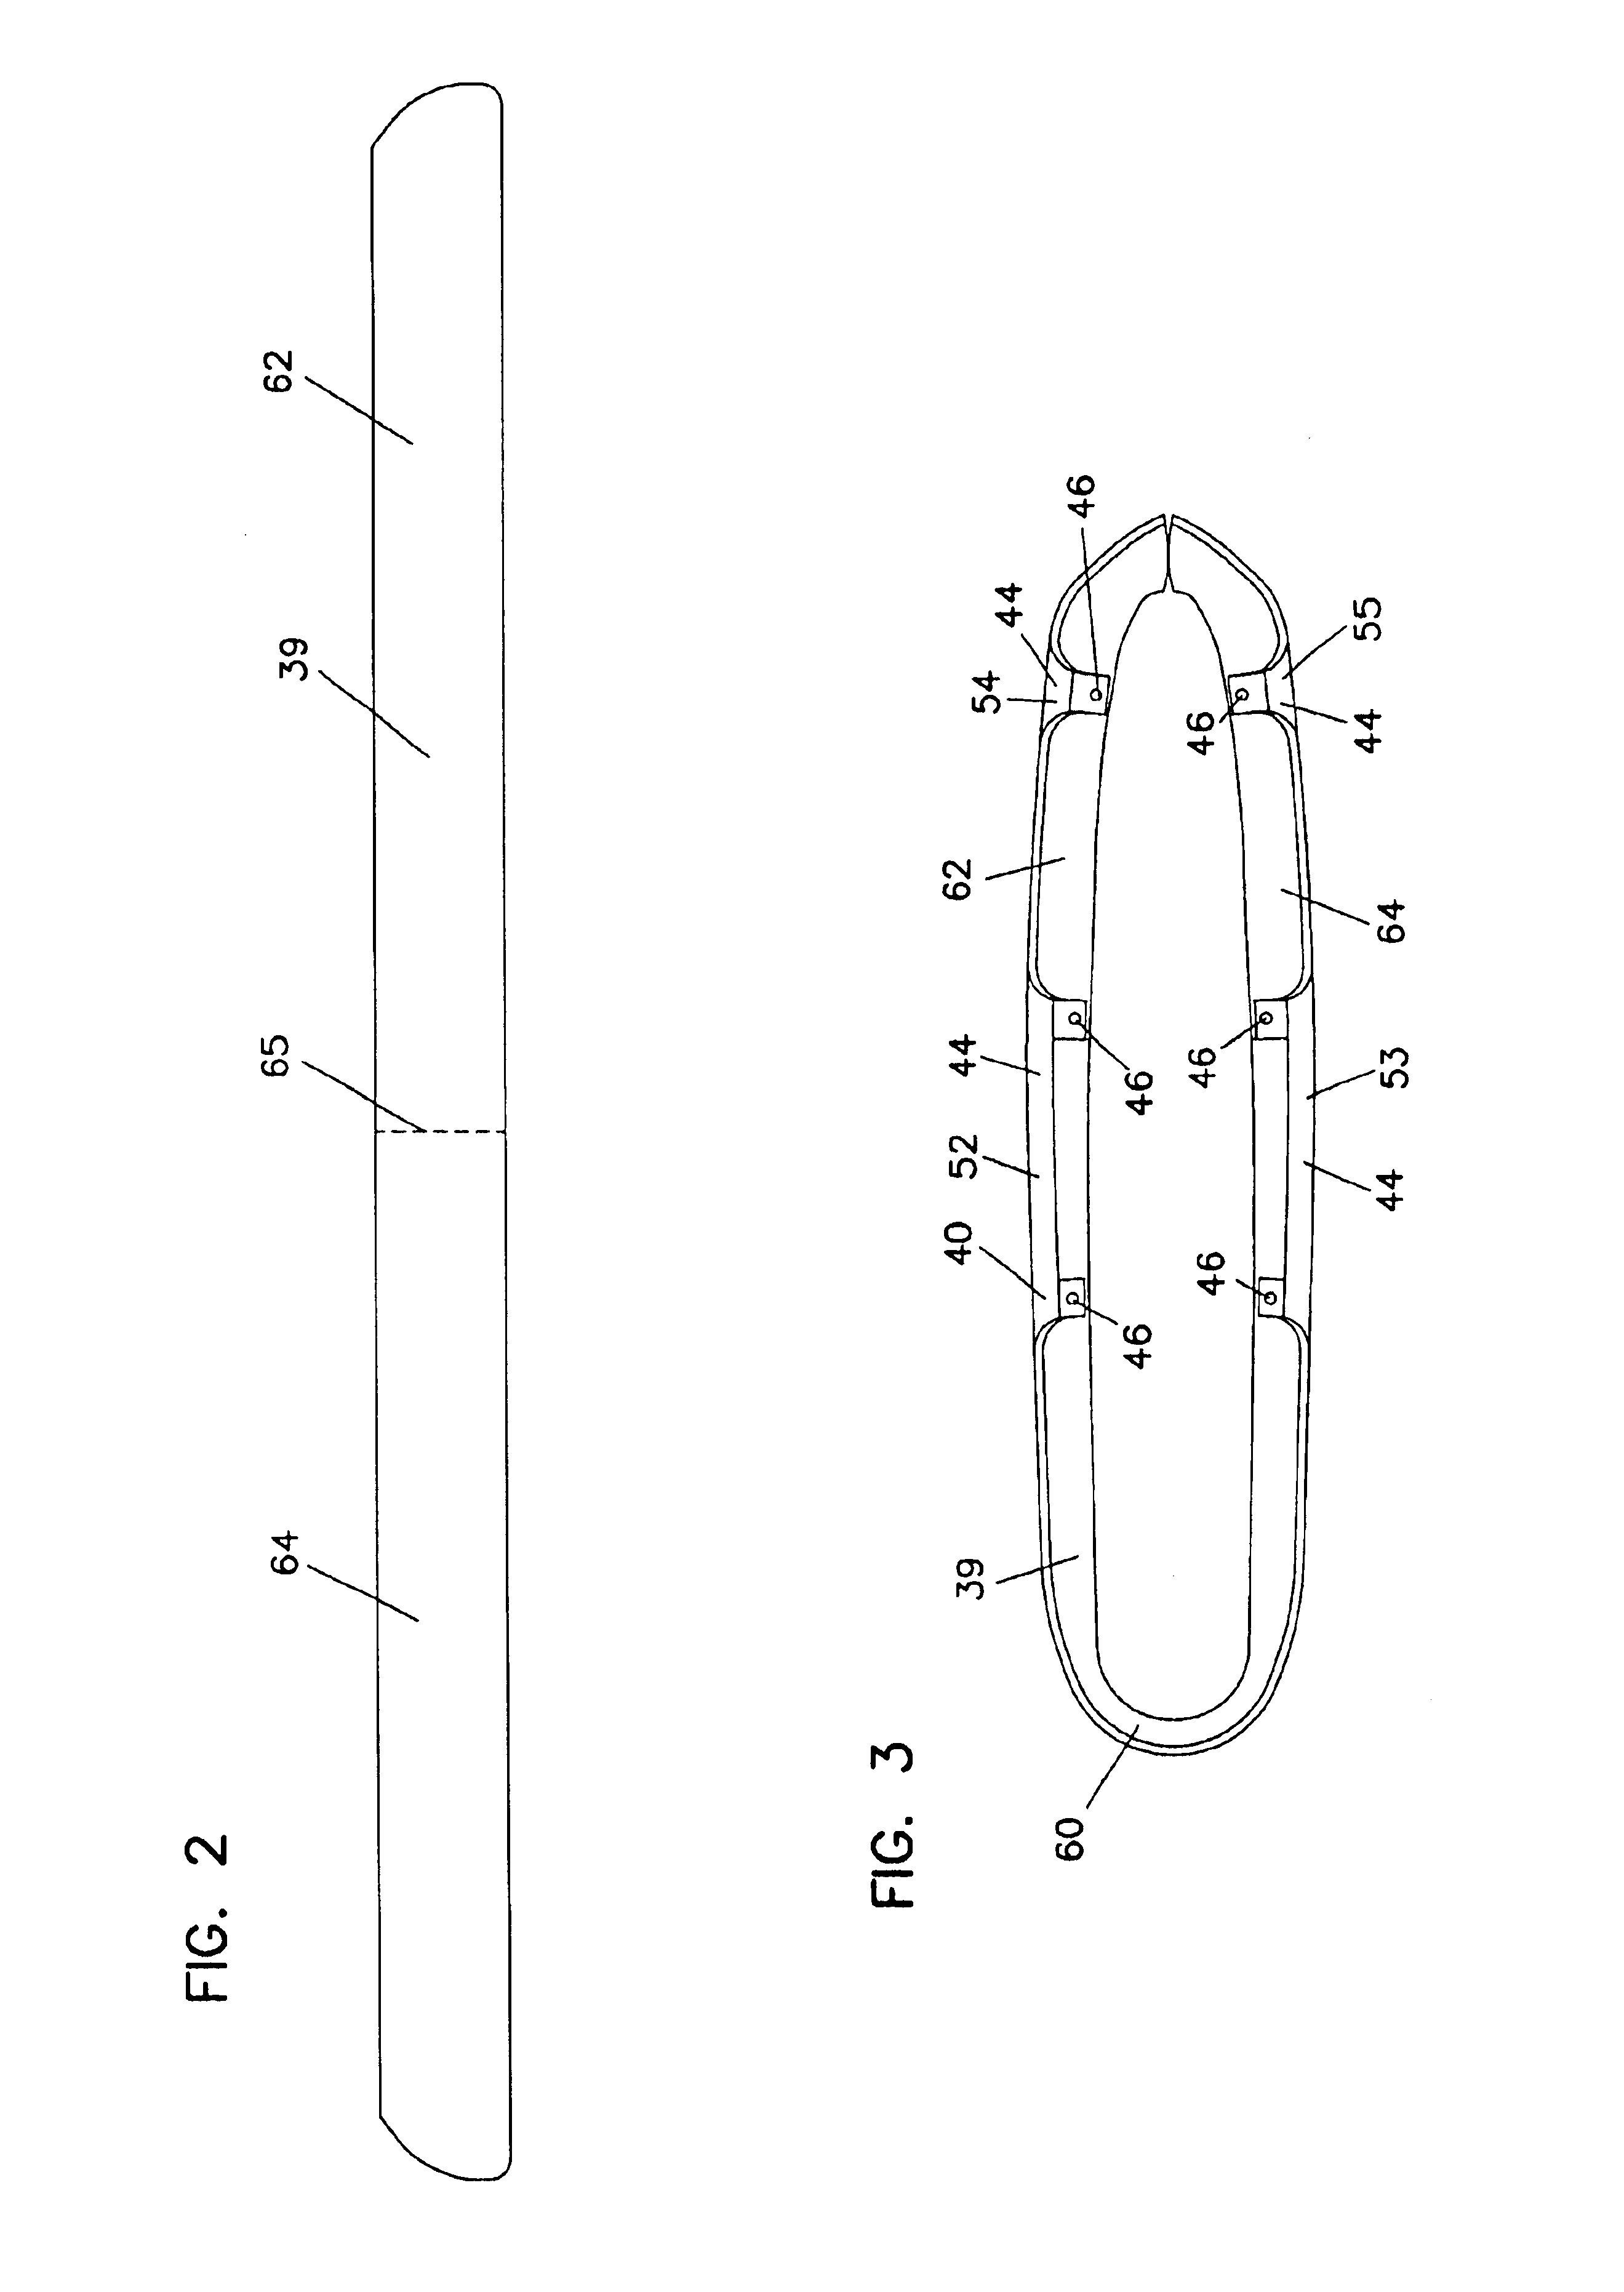 Vehicle shield device and methods for manufacturing and shipping a vehicle shield device